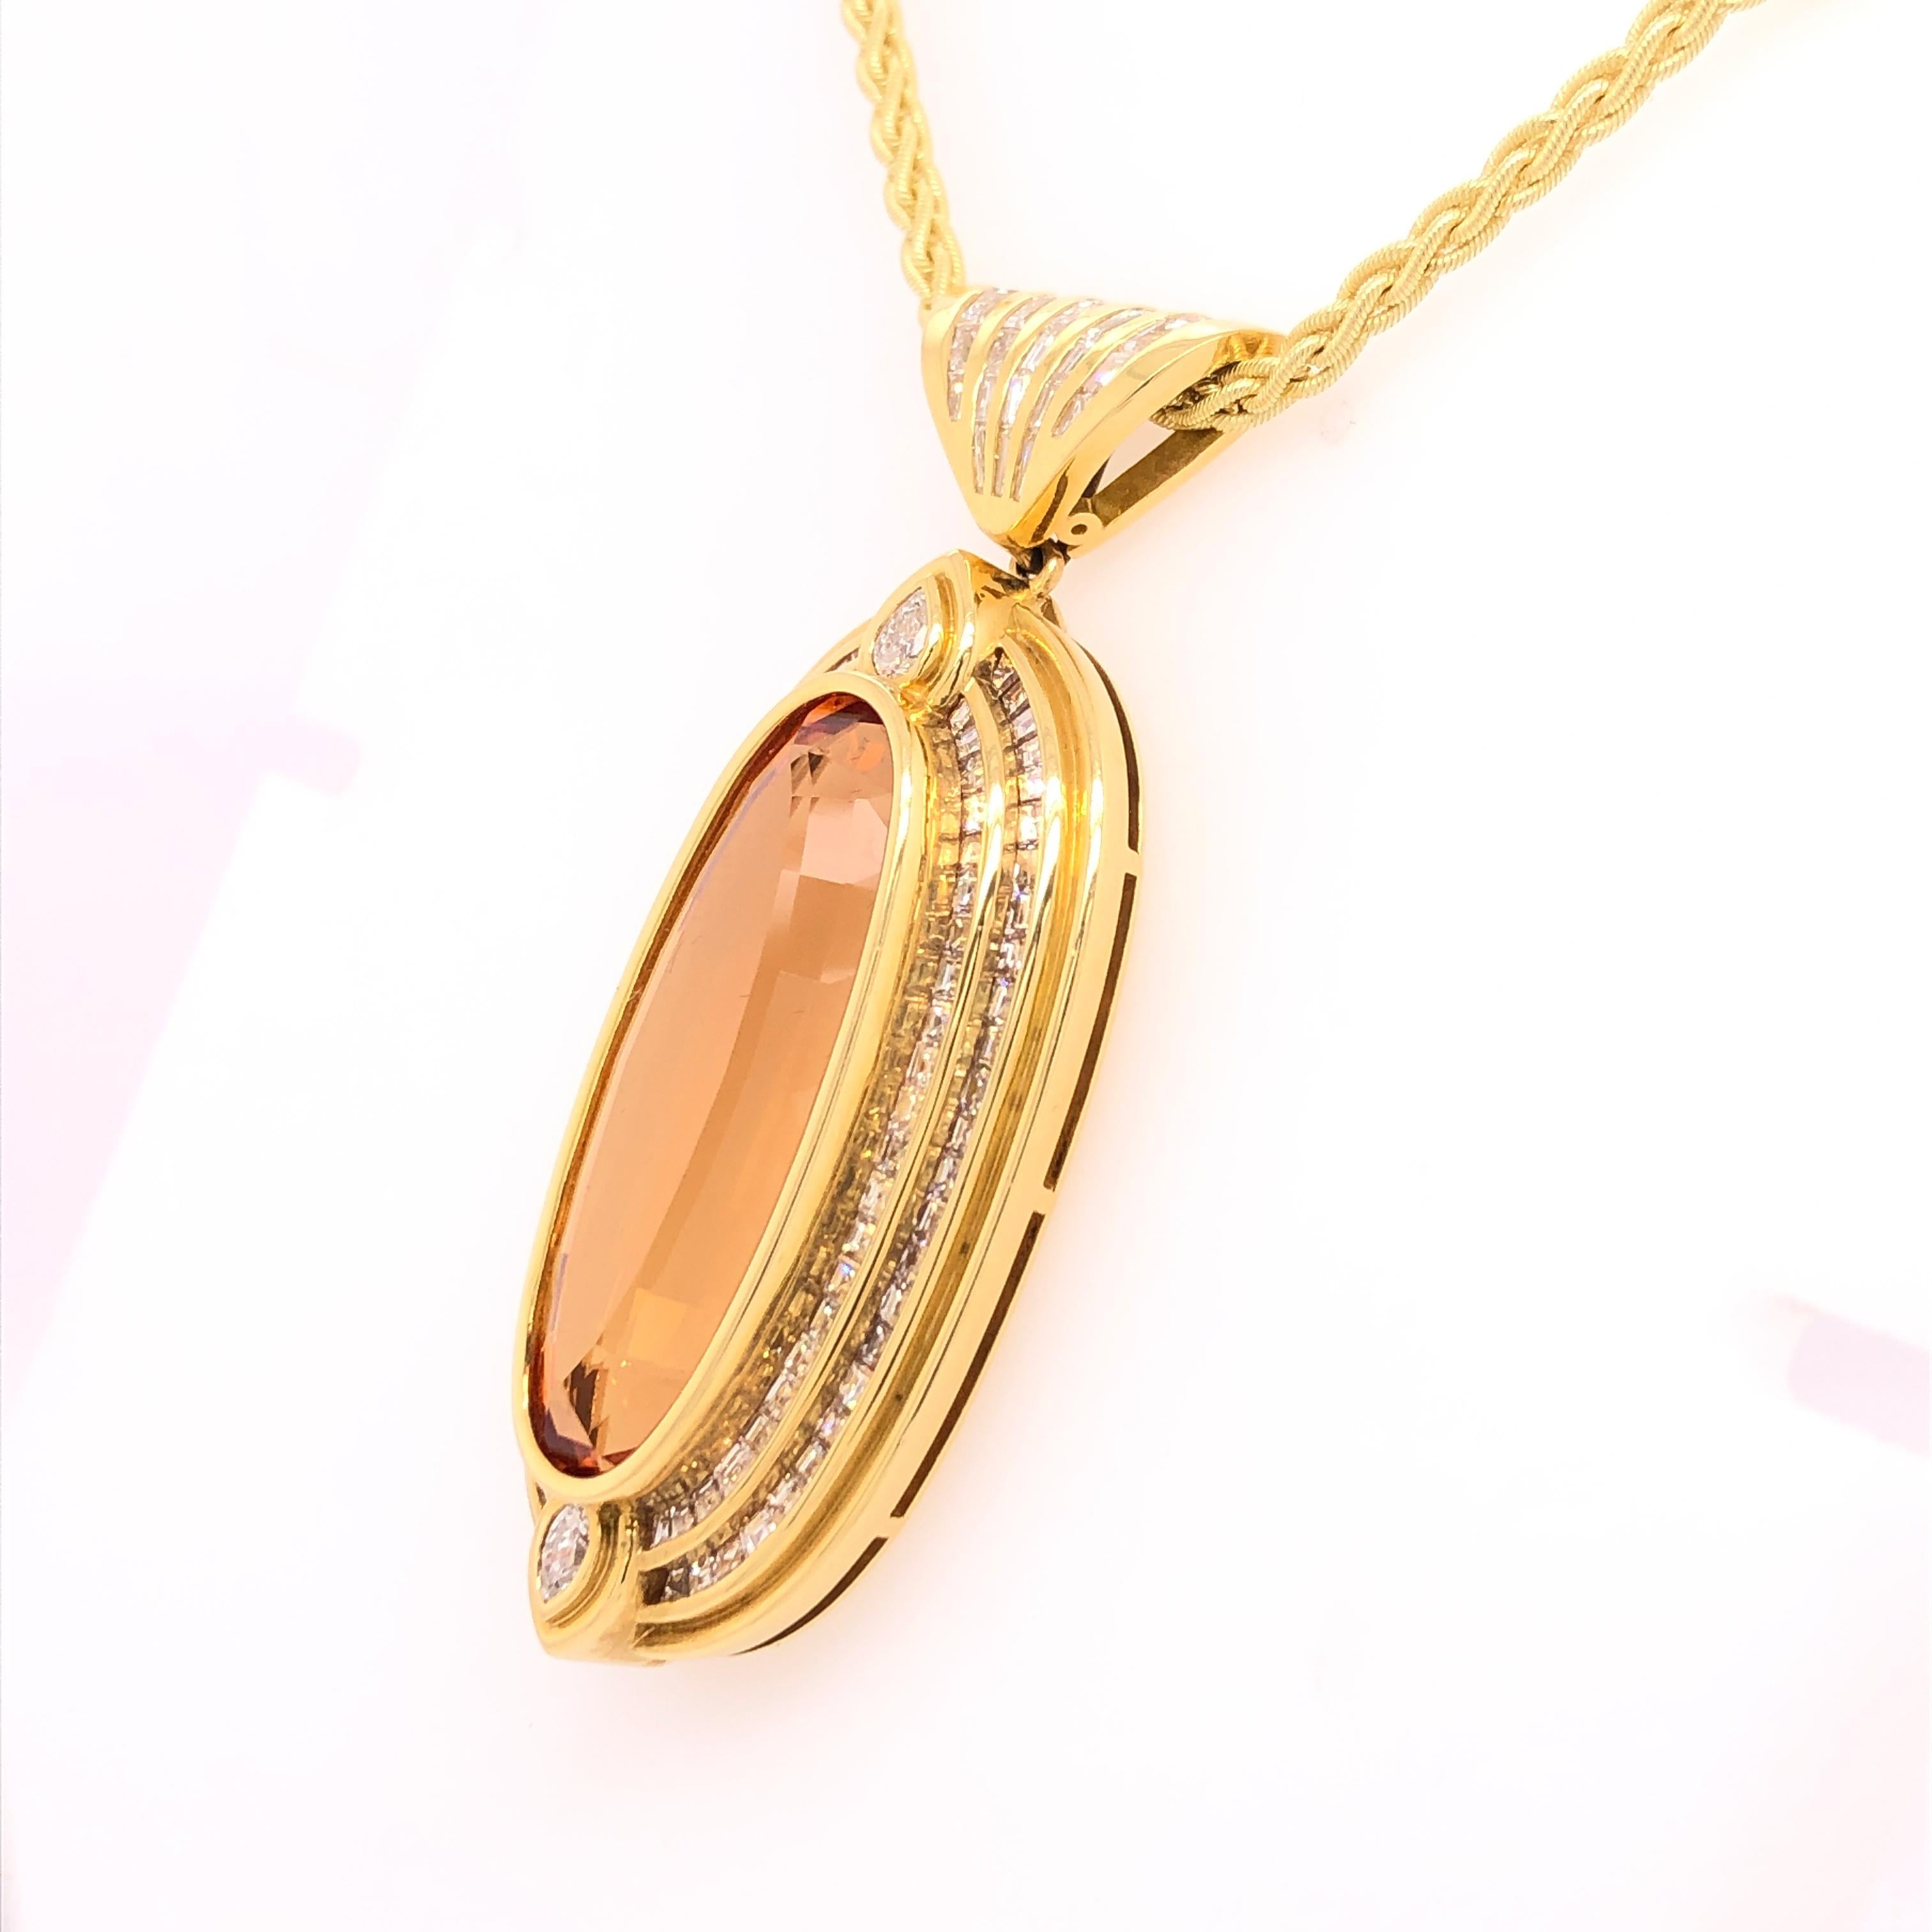 What strikes you first is the impressive size of the oval 42 carat Imperial Topaz that sits front and center in the 18K yellow gold pendant. Two rows of princess cut channel set diamonds surround the topaz giving it an even grander appearance. Two